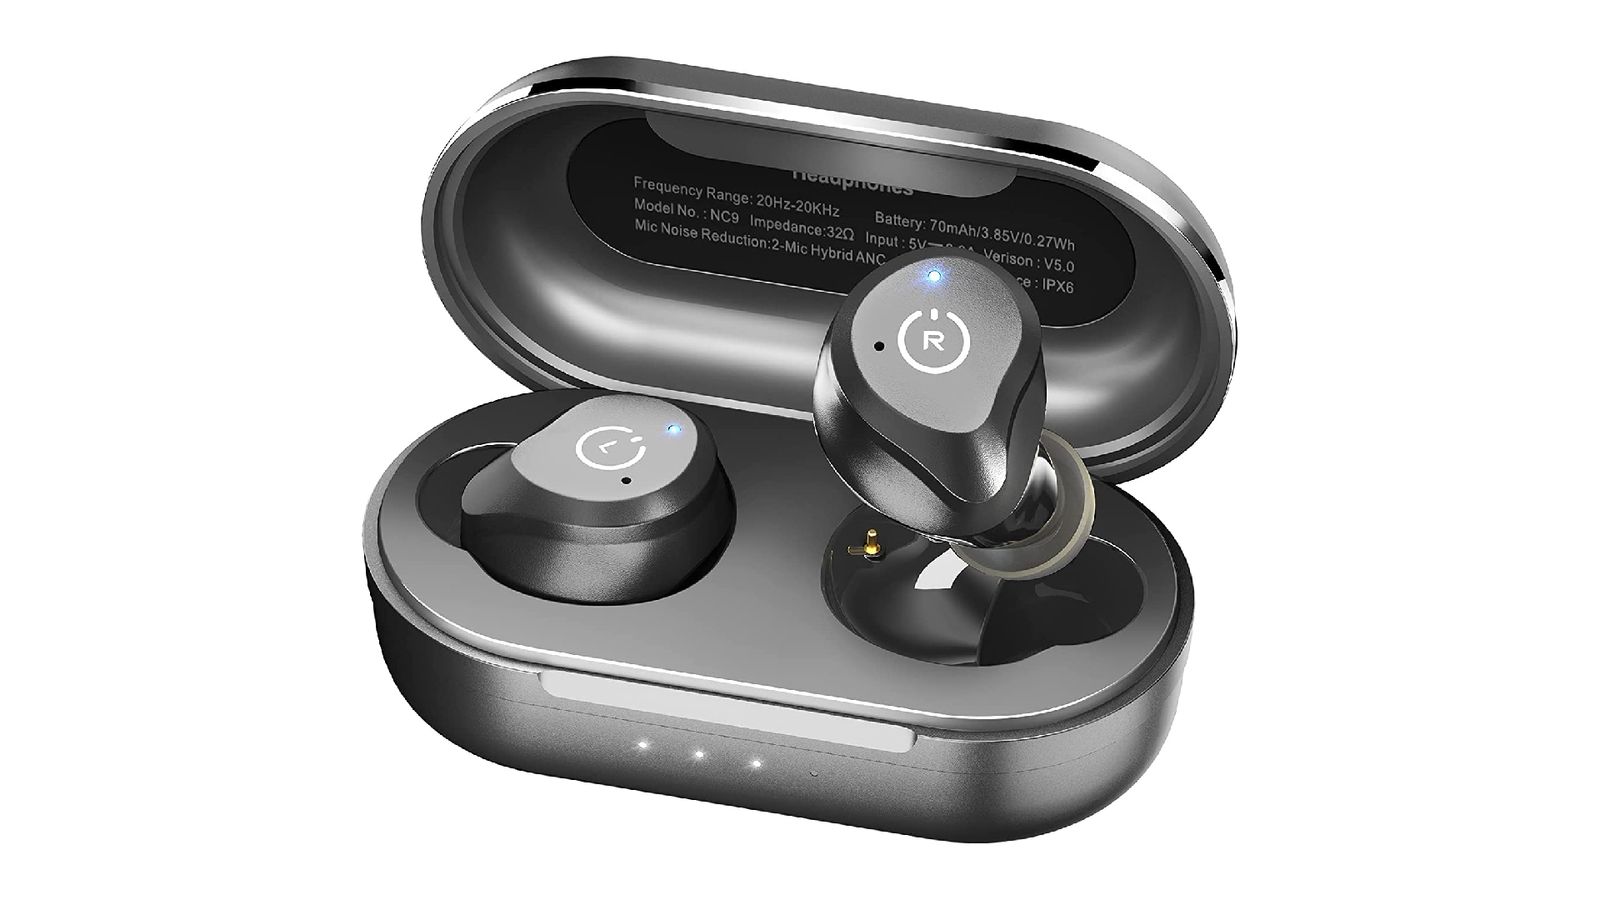 Best Android earbuds - TOZO NC9 product image of a matte black charging case with two earbuds inside.